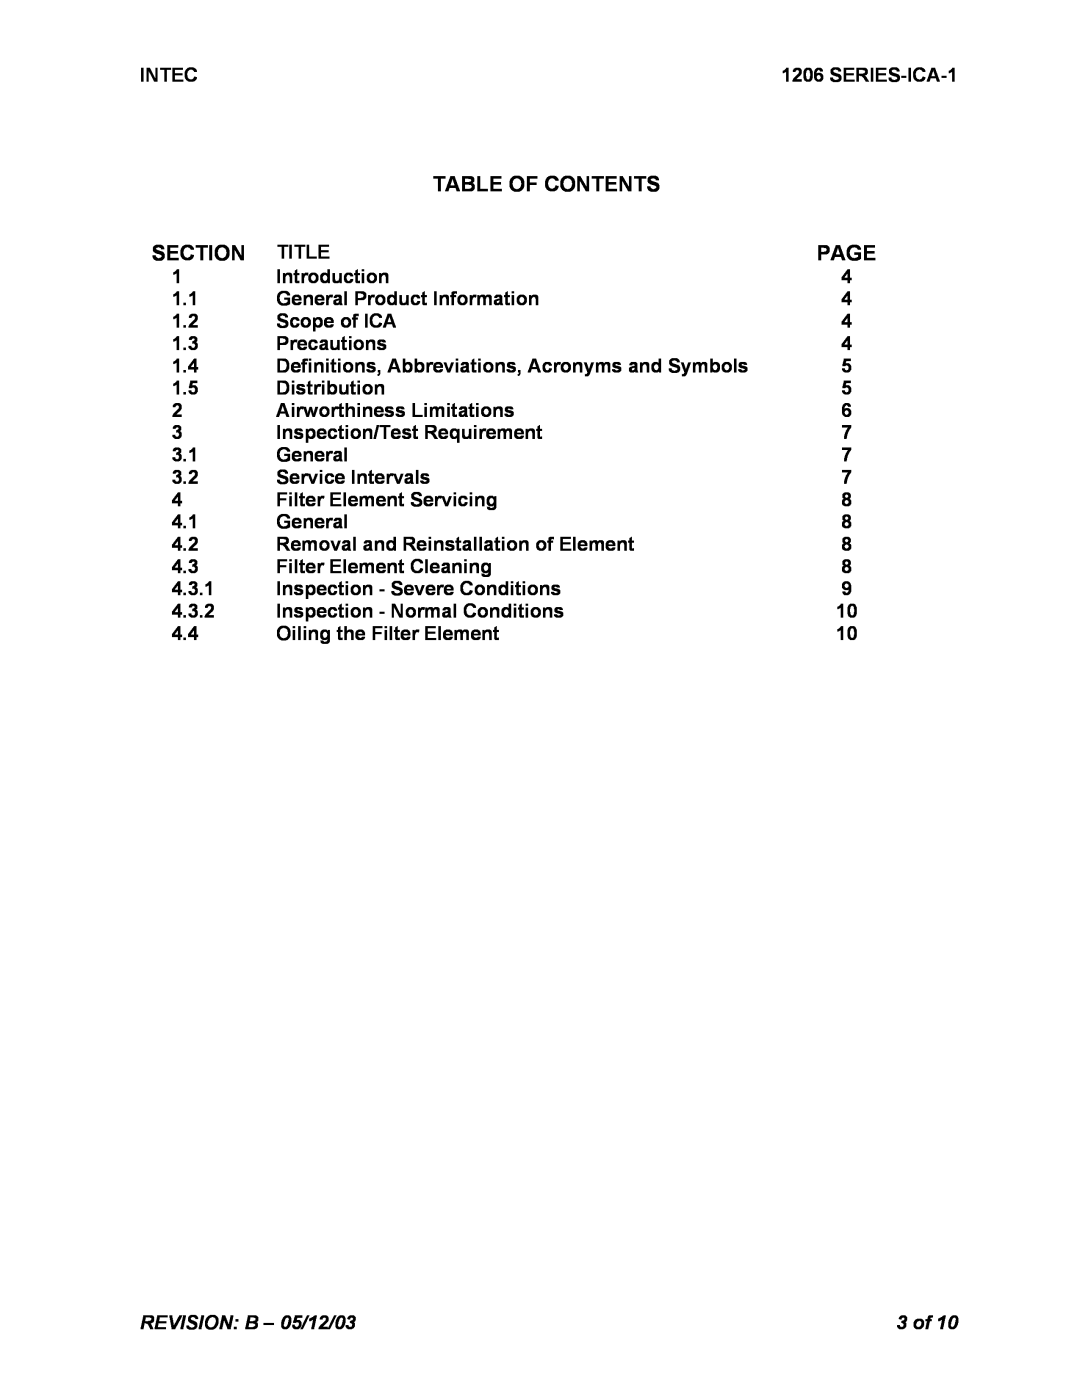 Intec STC SR00180SE manual Table Of Contents, Section, Page 